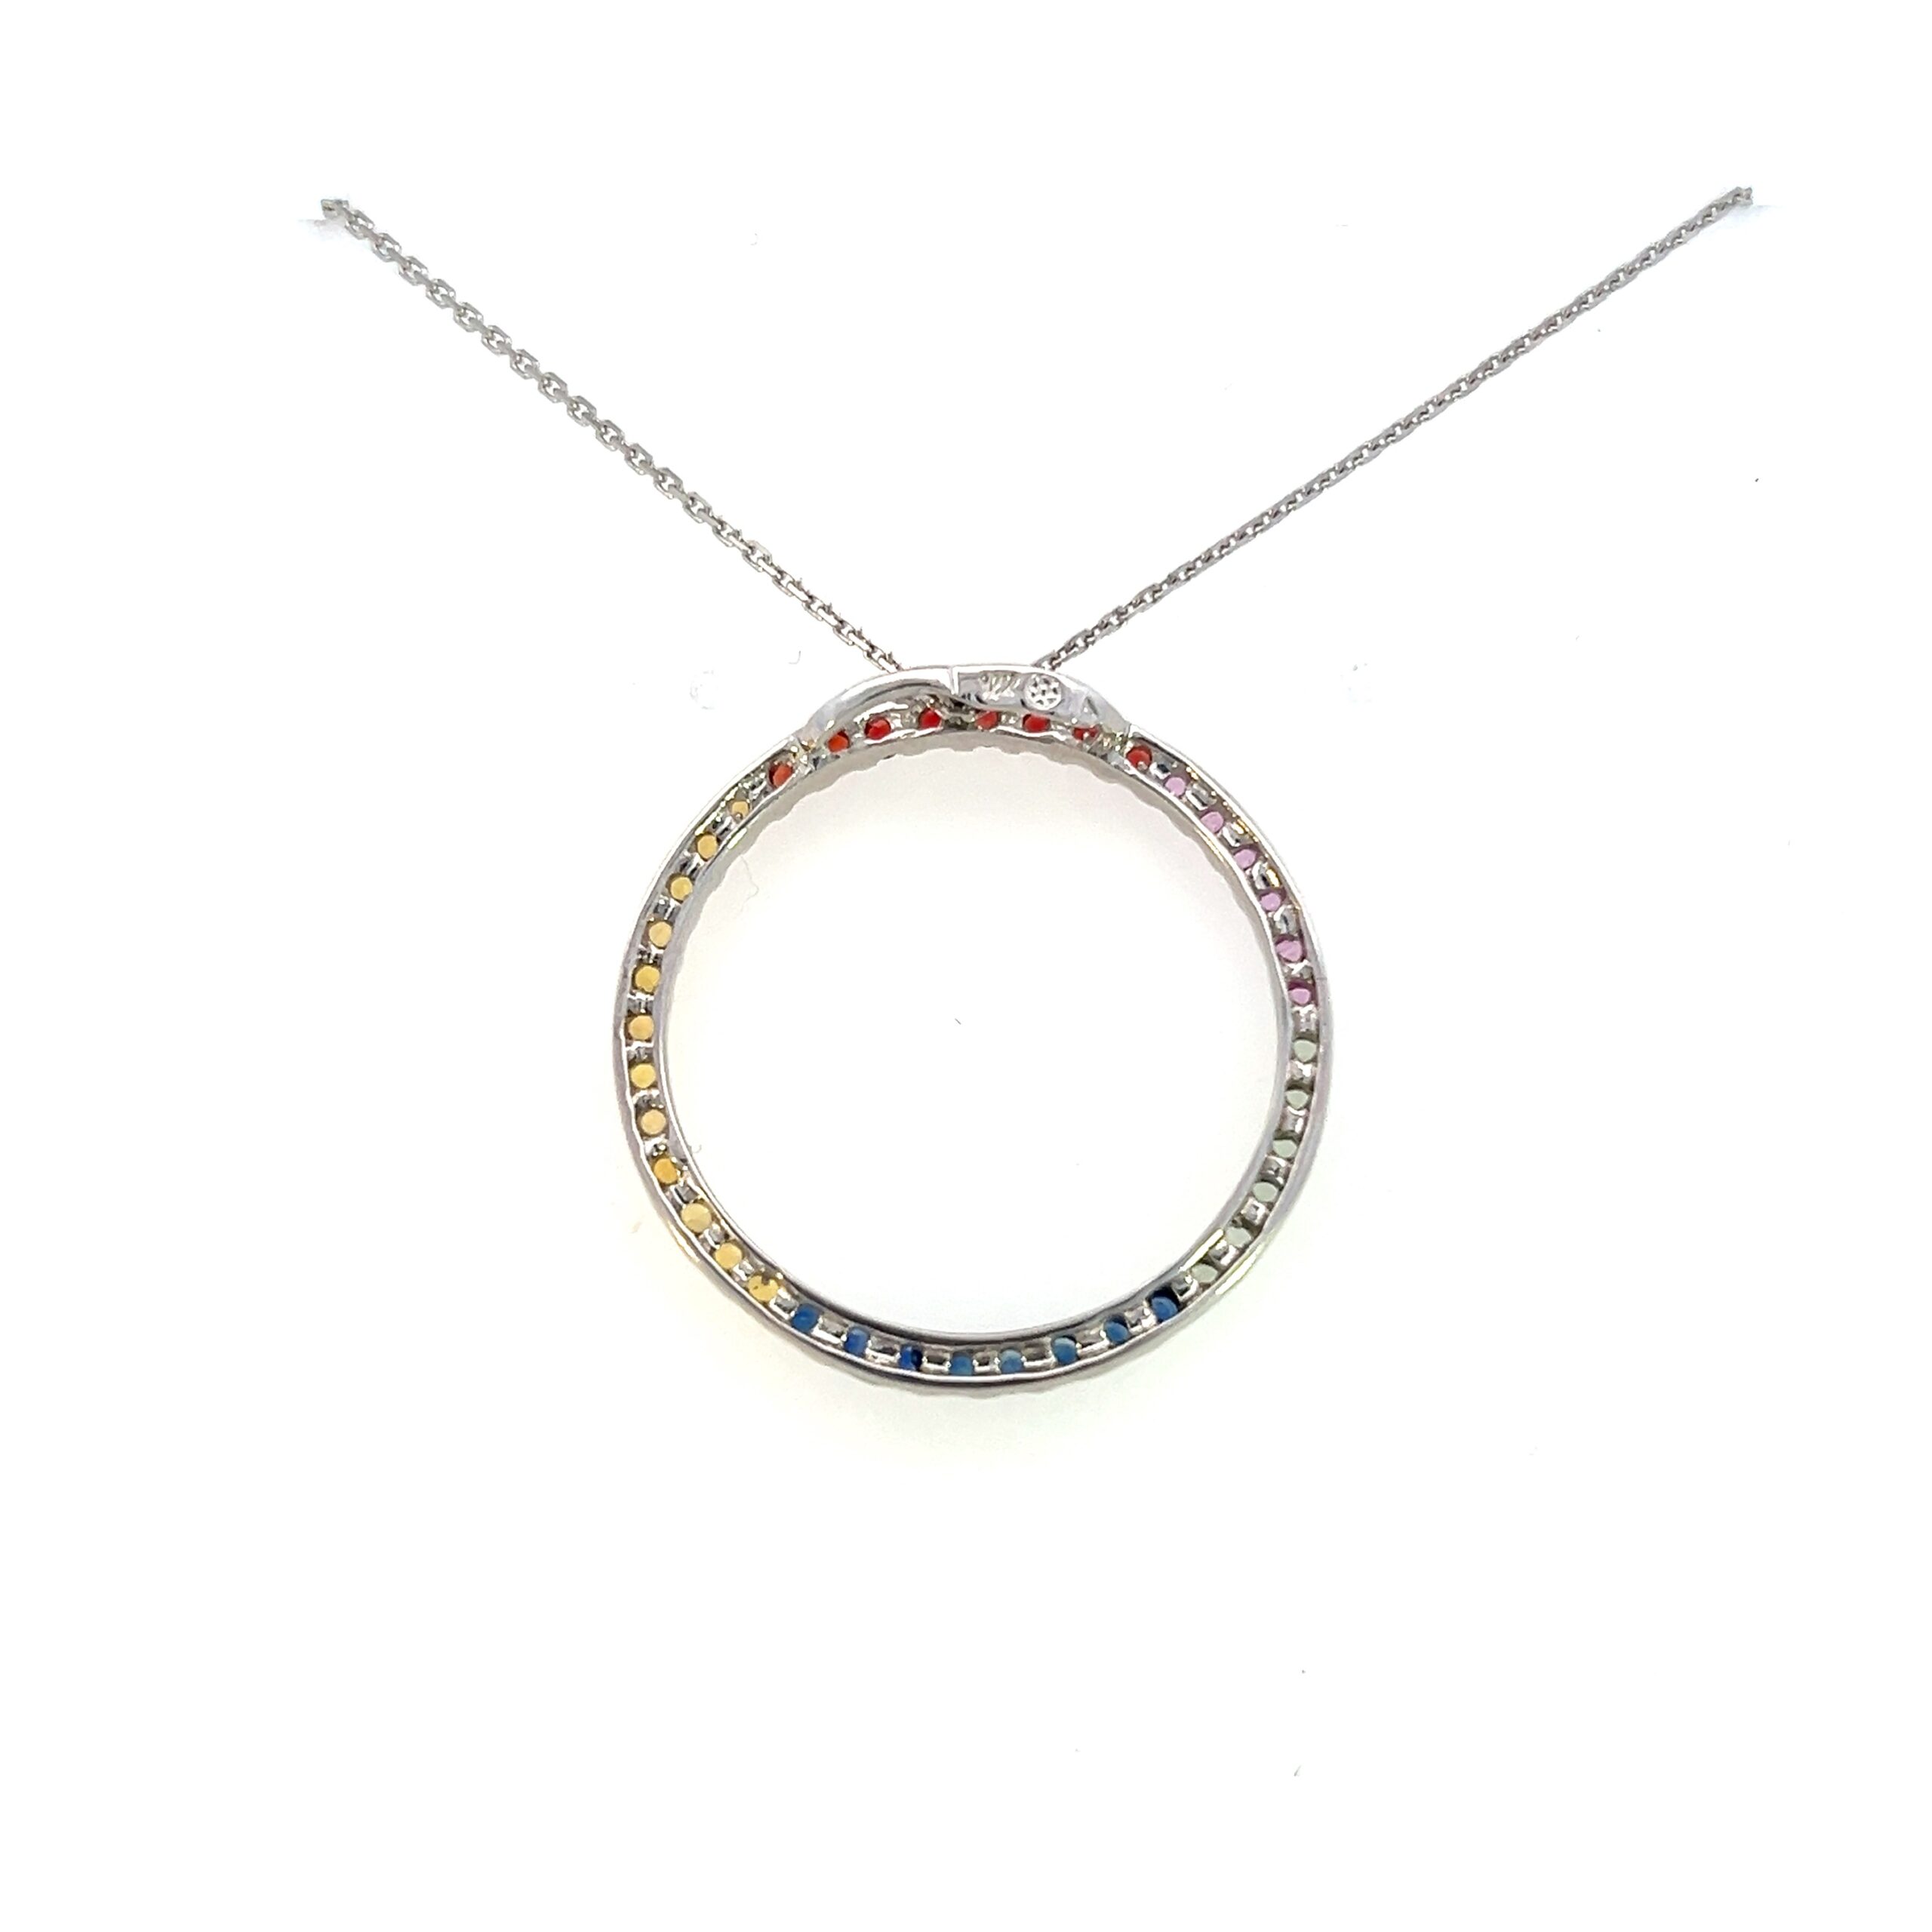 One estate 14 karat white gold pendant necklace with a 25mm open circle pendant set with 39 round-faceted sapphires in various hues including pink, orange, yellow, and blue measuring 2mm each